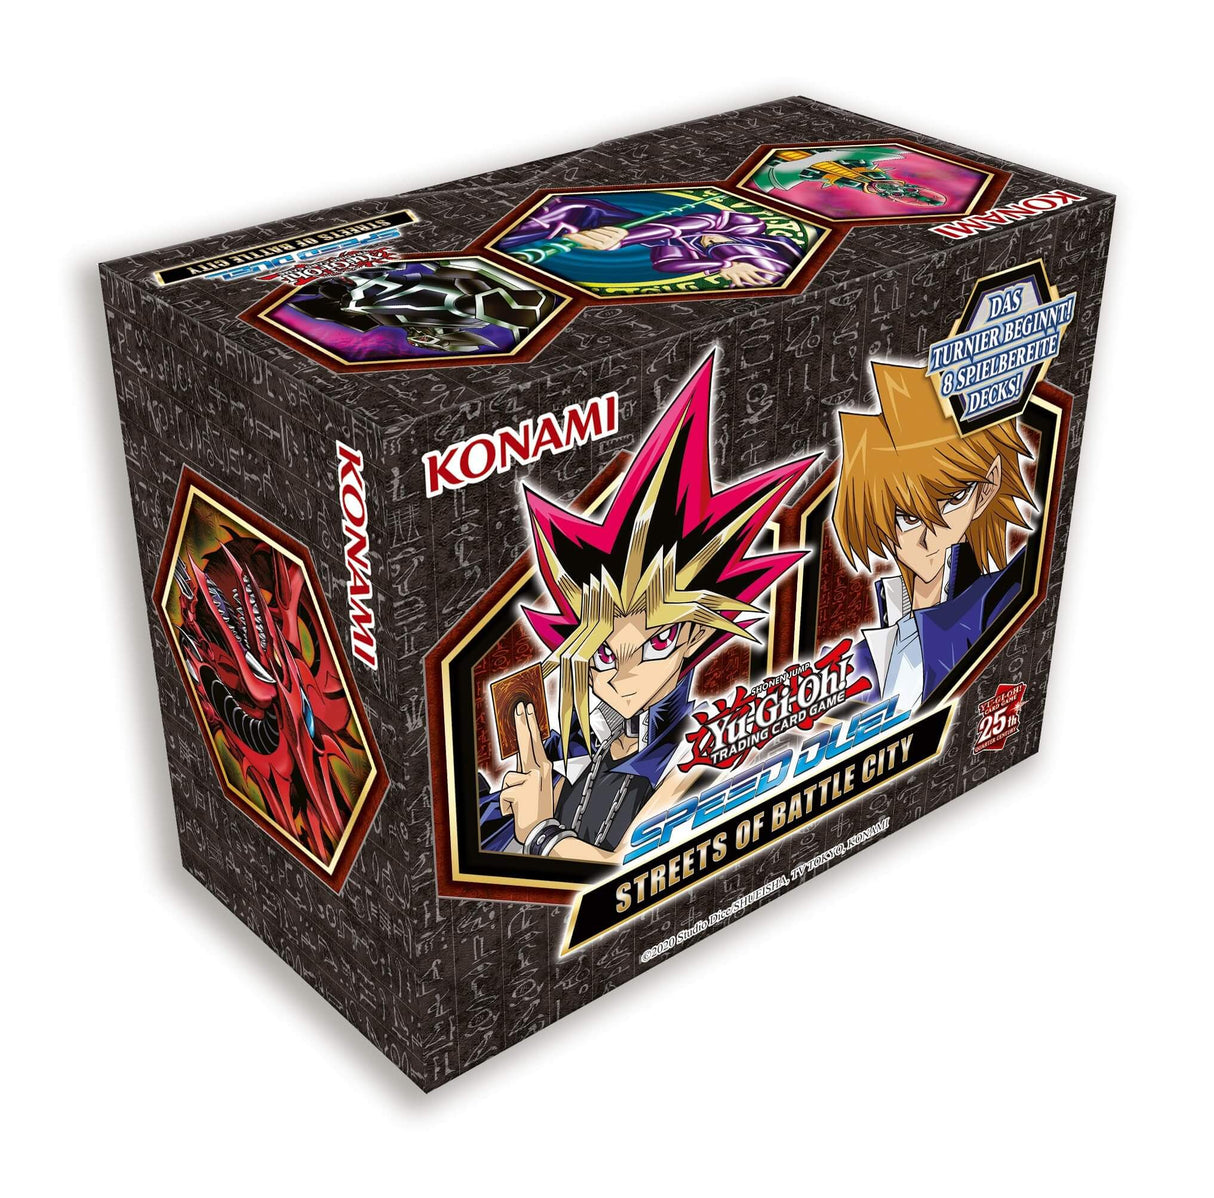 Yu-Gi-Oh: Speed Duel Streets of Battle City Box